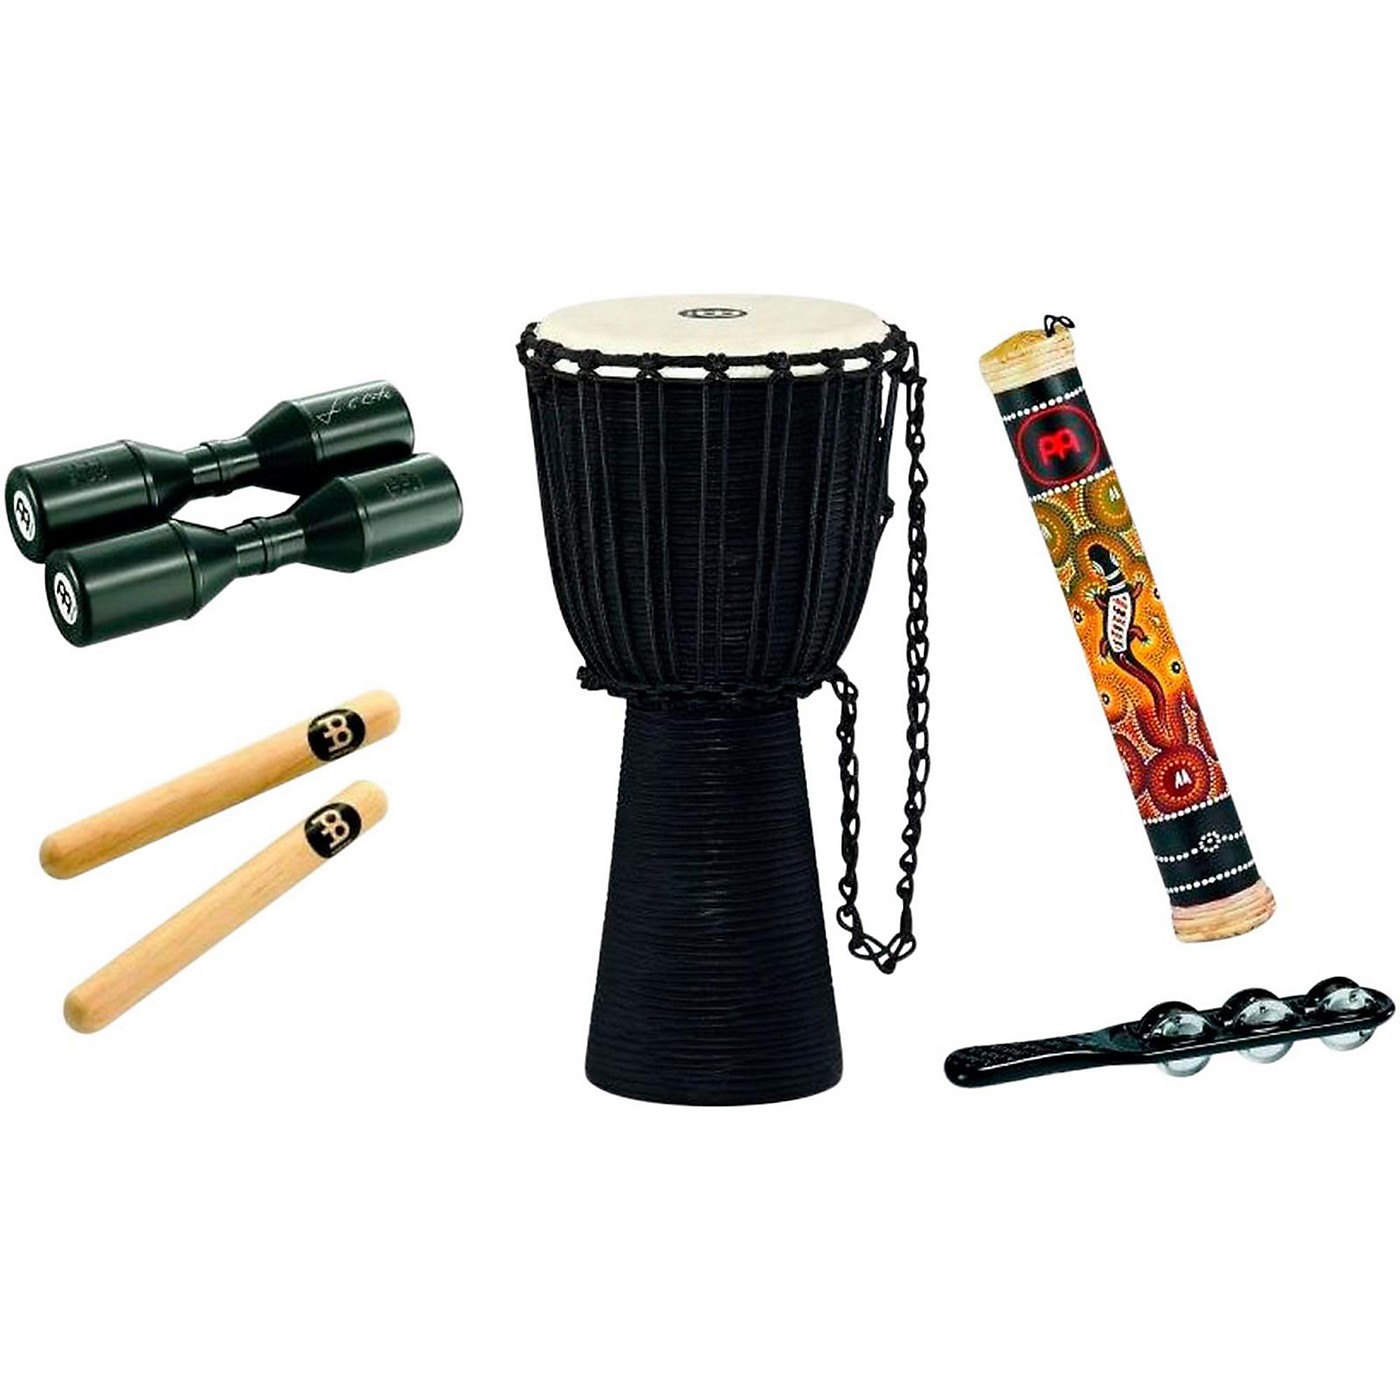 Meinl Headliner Djembe Percussion Pack with Free Shaker and Jingle Stick thumbnail